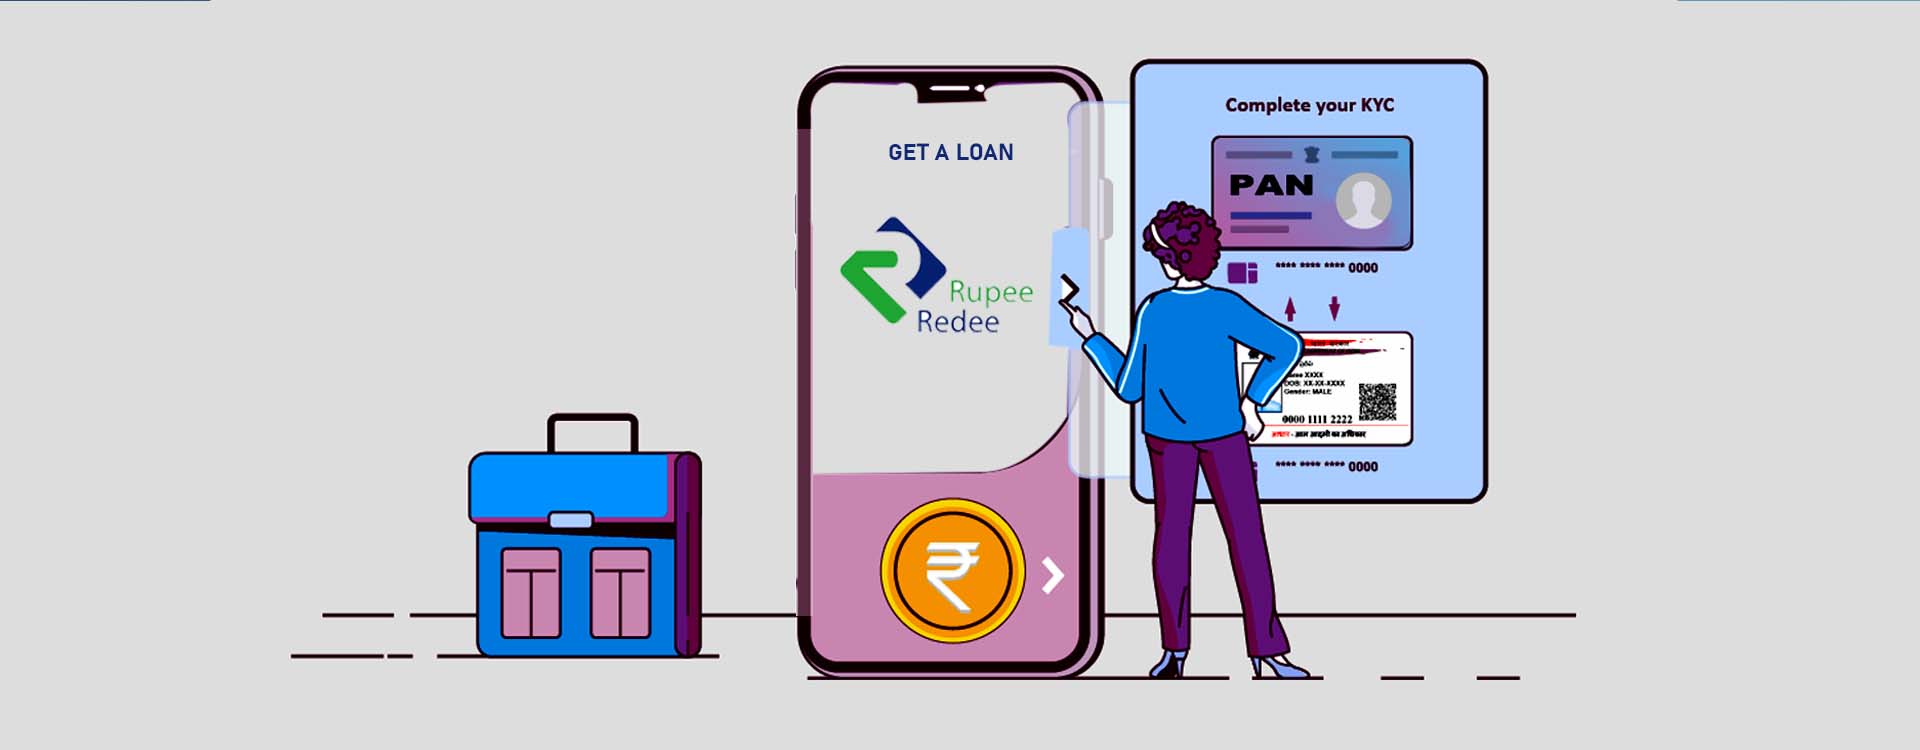 RupeeRedee offer loans digitally to low income families and MSME quickly.